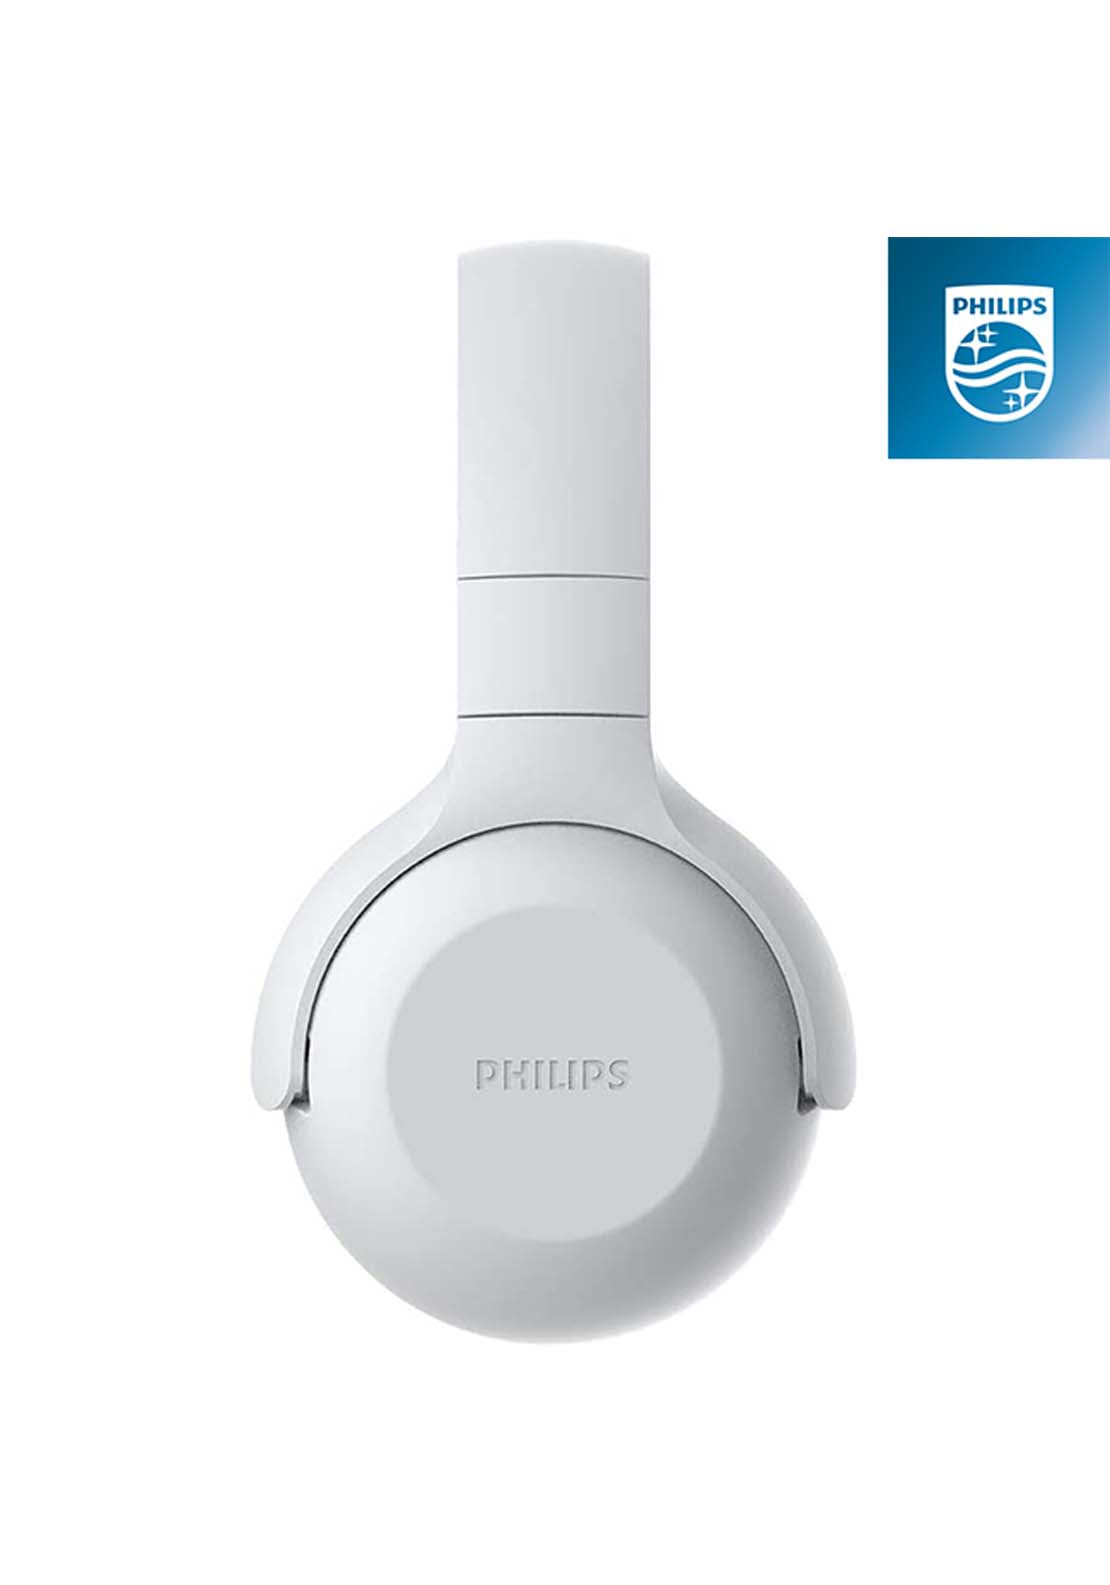 Philips On-Ear Bluetooth Headphones | Tauh202Wt00 5 Shaws Department Stores